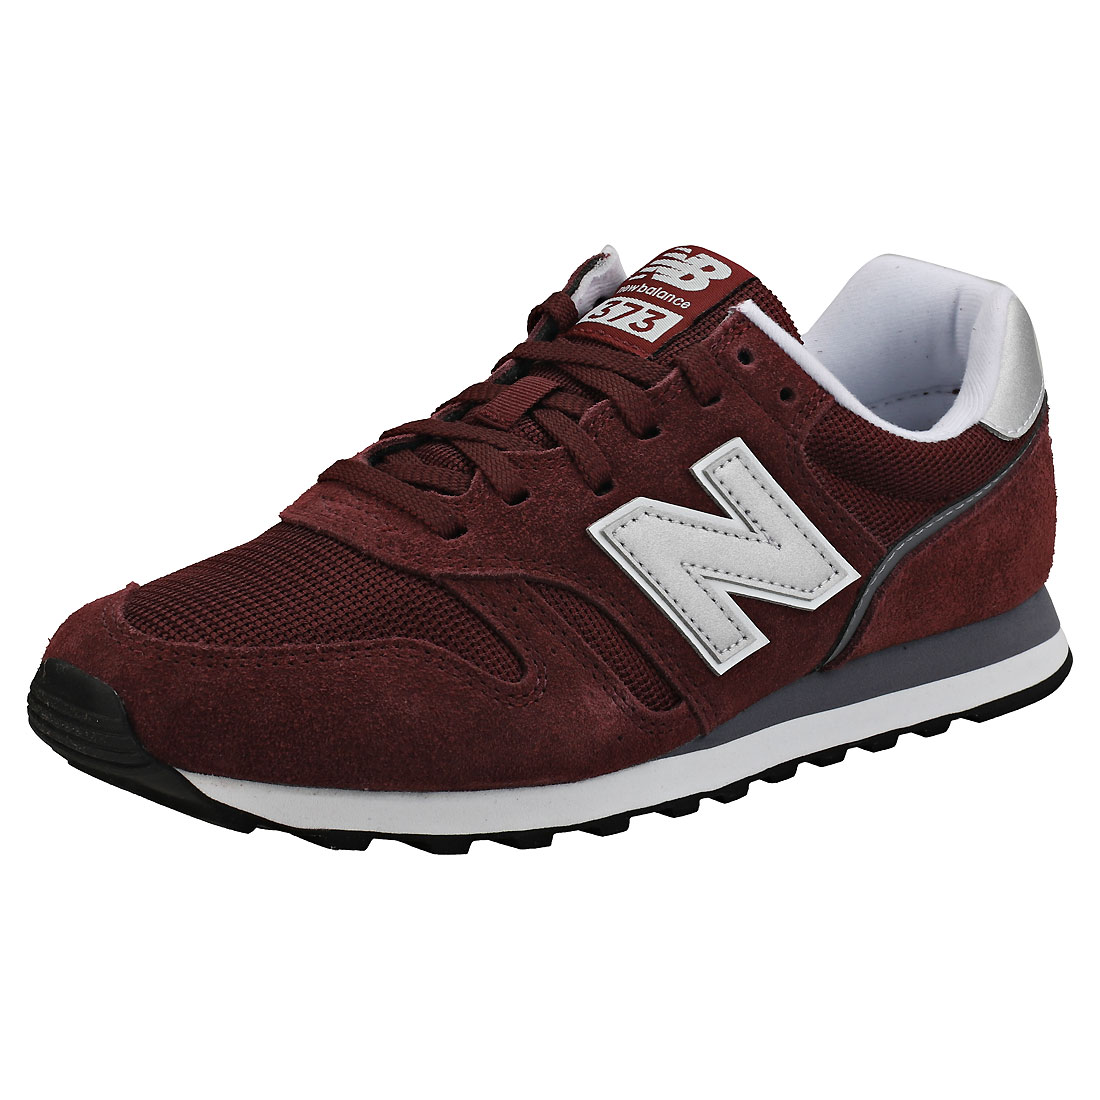 nb 515 leather